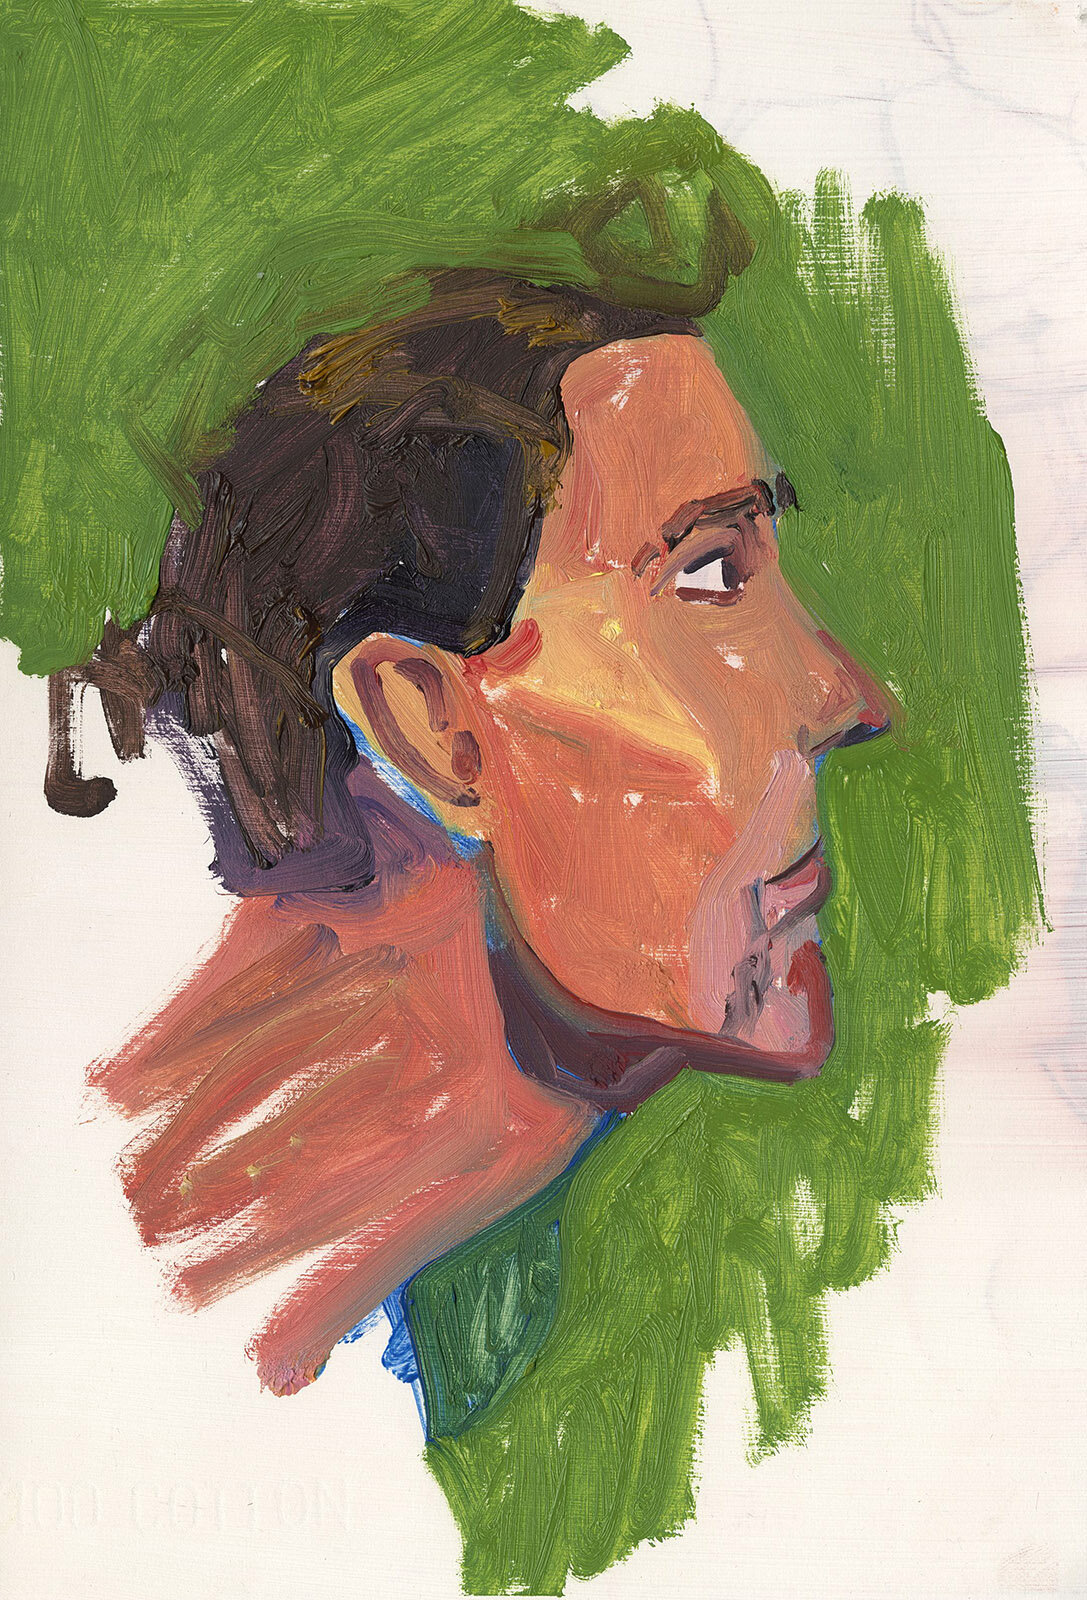 Étienne Profile, July 18, 2021 (20-minute painting) 